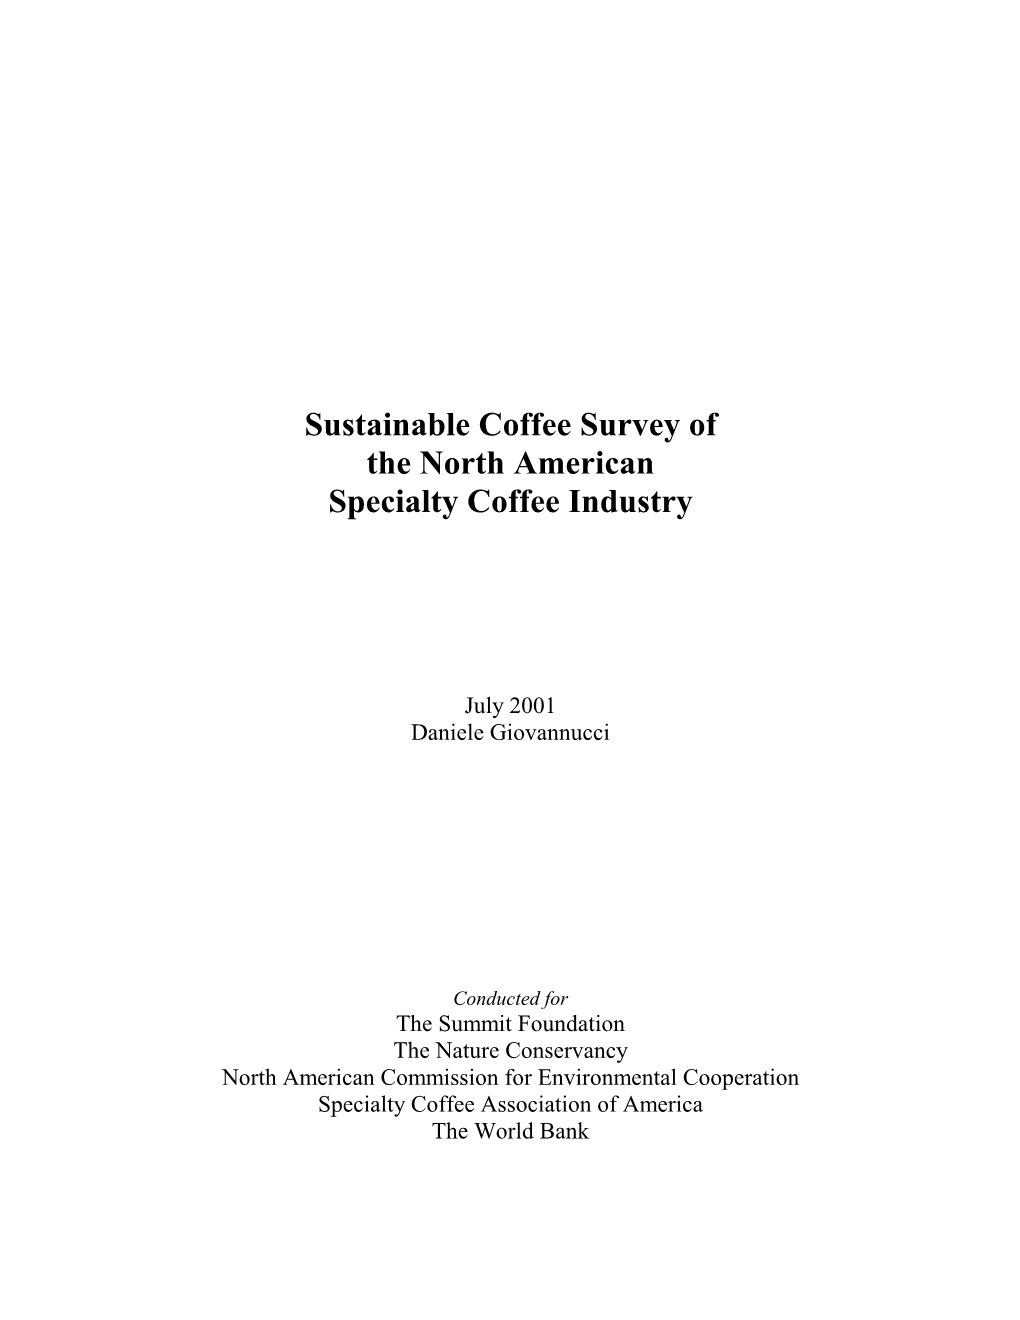 Sustainable Coffee Survey of the North American Specialty Coffee Industry